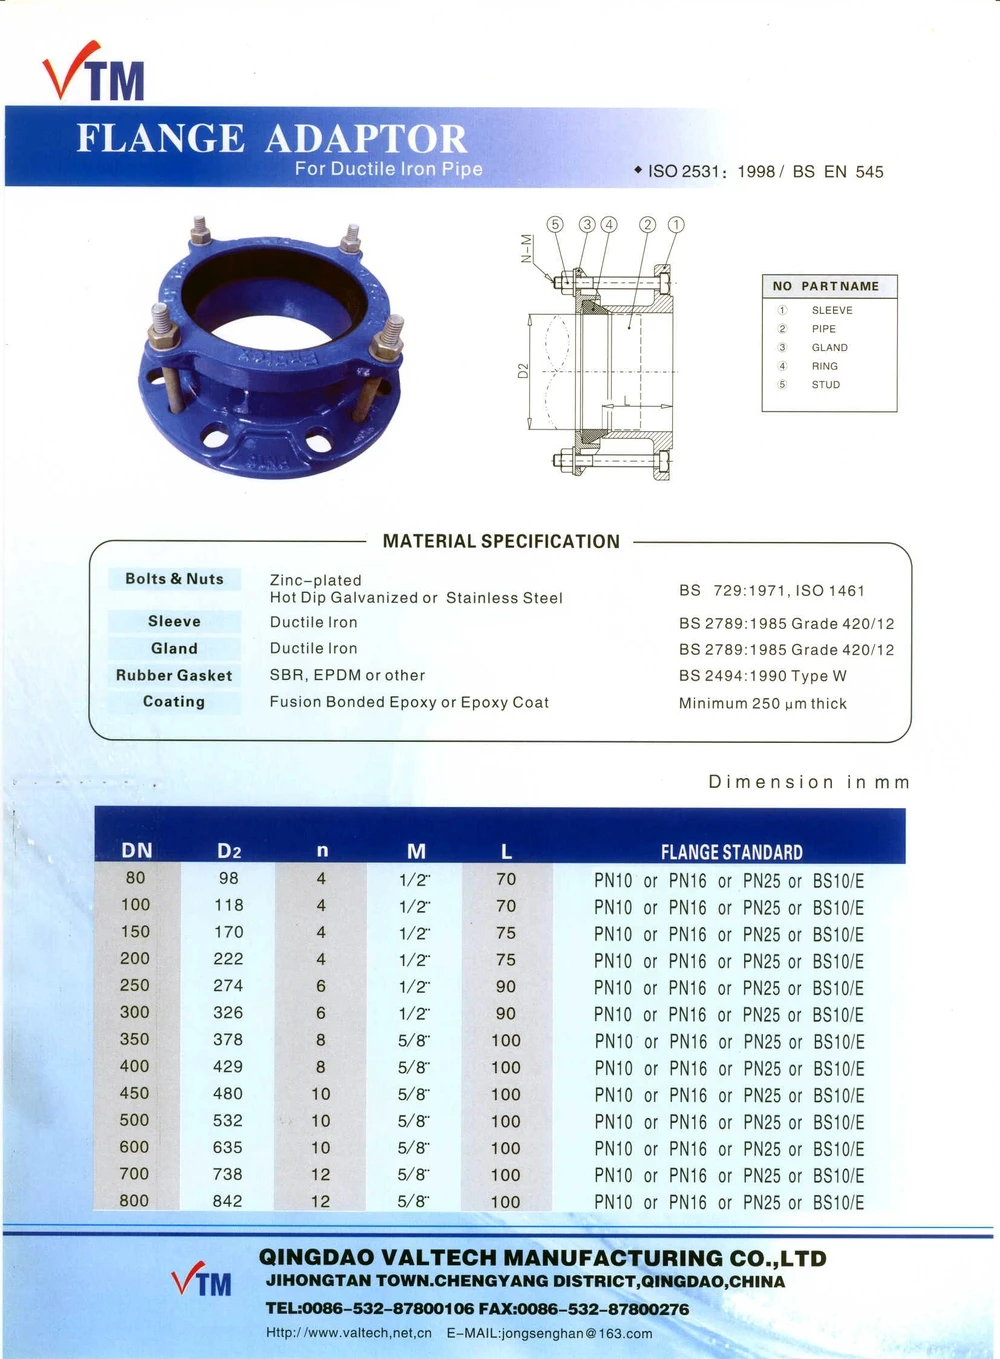 Iso2531/bsen545 Flange Adaptor For Ductile Iron Pipe - Buy Iso2531